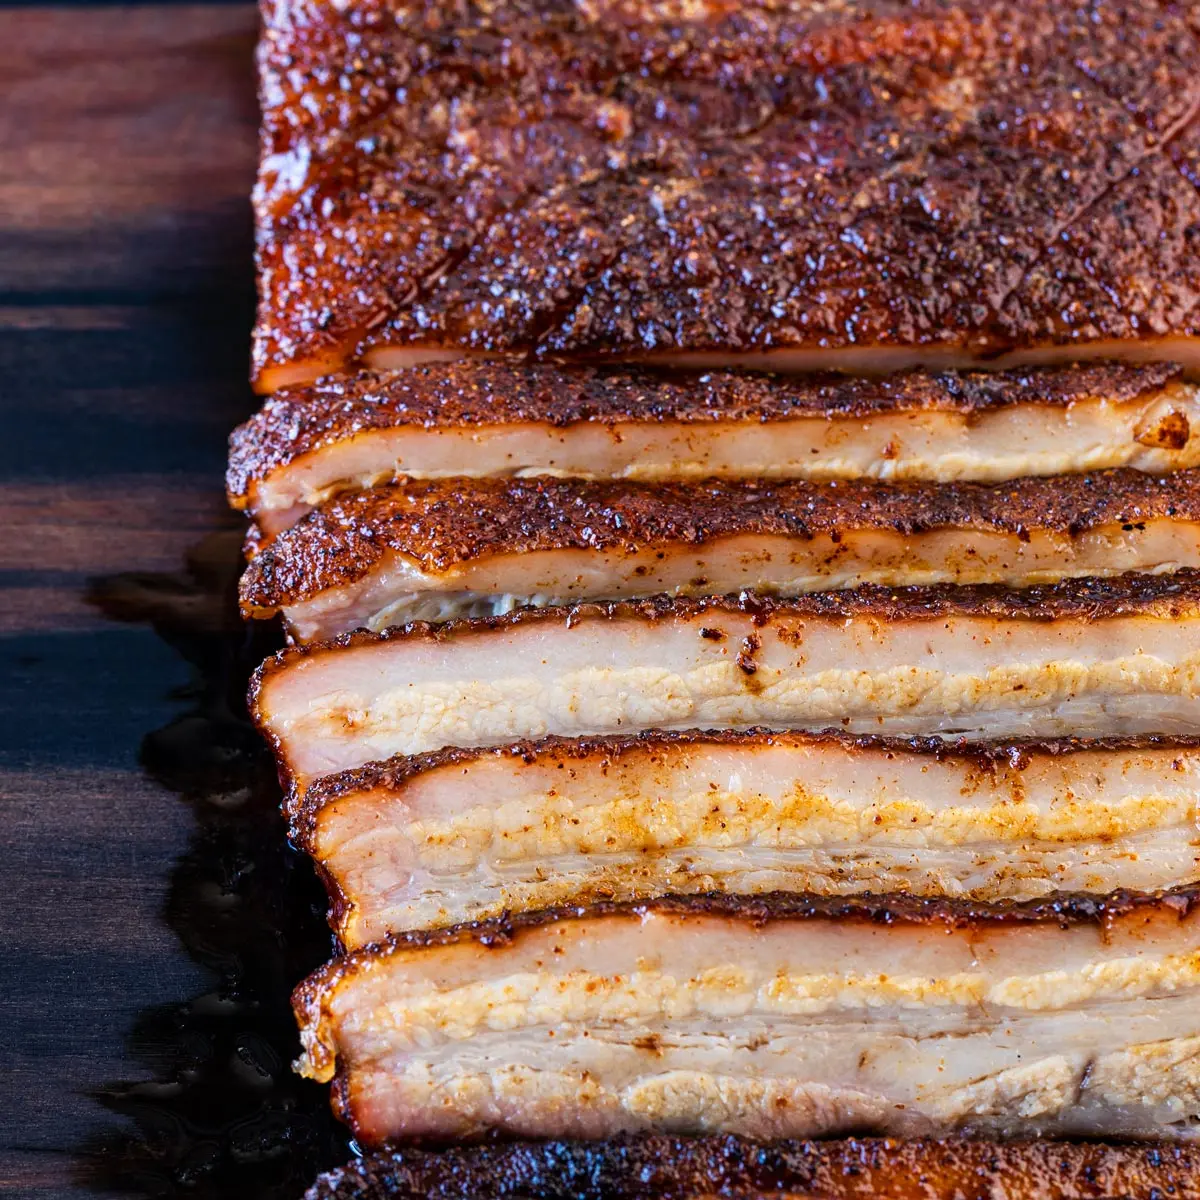 smoked pork belly recipes - How long does it take to smoke a pork belly